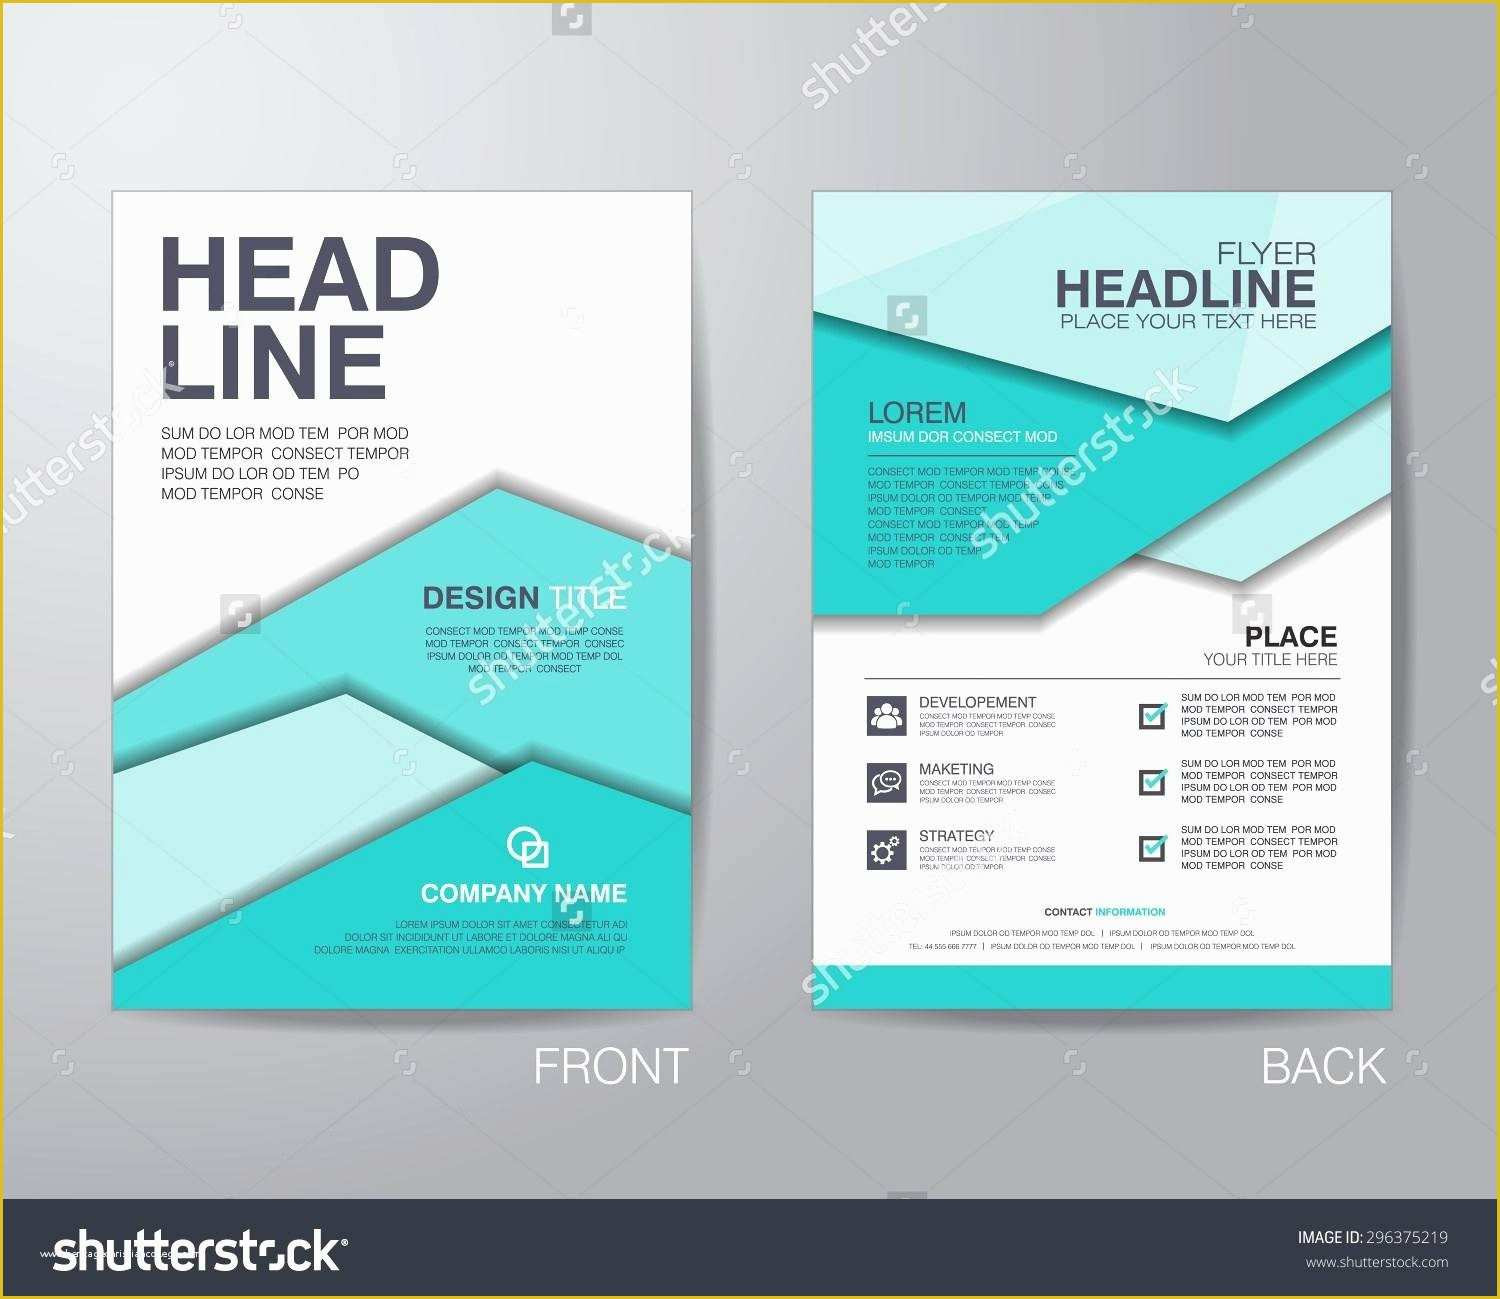 adobe business card template free of adobe indesign business card template beautiful adobe of adobe business card template free